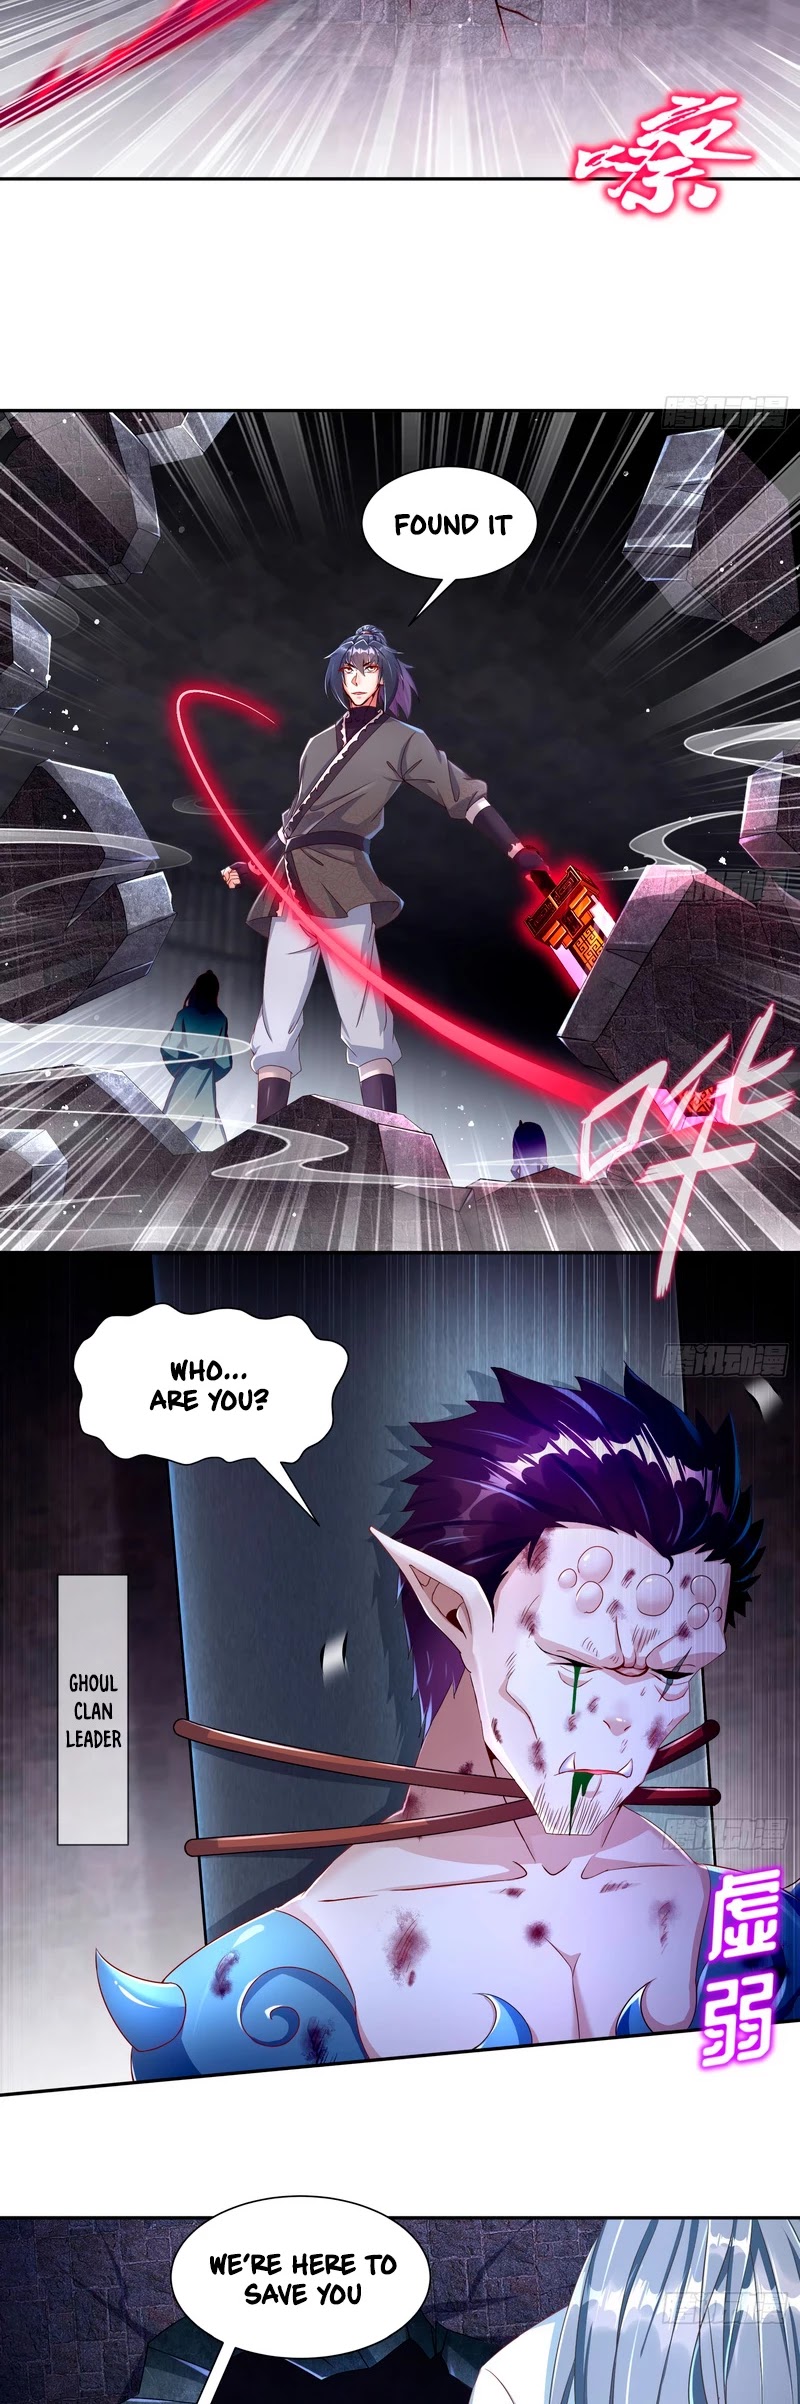 The Rebirth Of The Demon God - Page 3